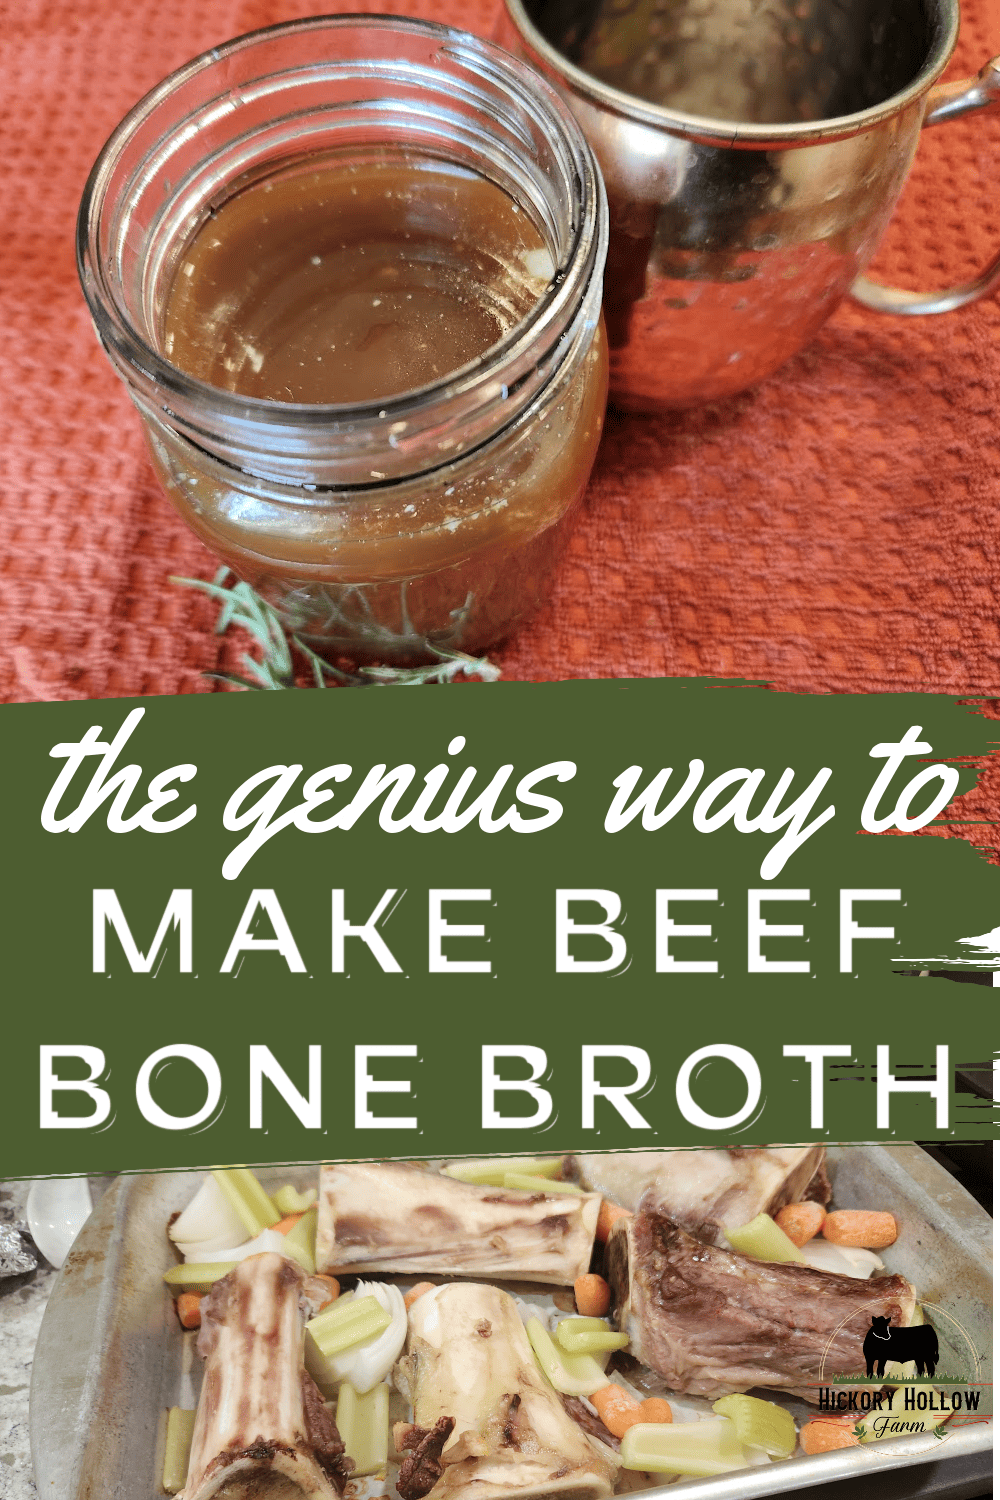 Learn how to make beef bone broth the simple way, in the slow cooker! Bone broth is super healthy and full of vitamins. Use your wholesale beef bones for a homestead friendly project
